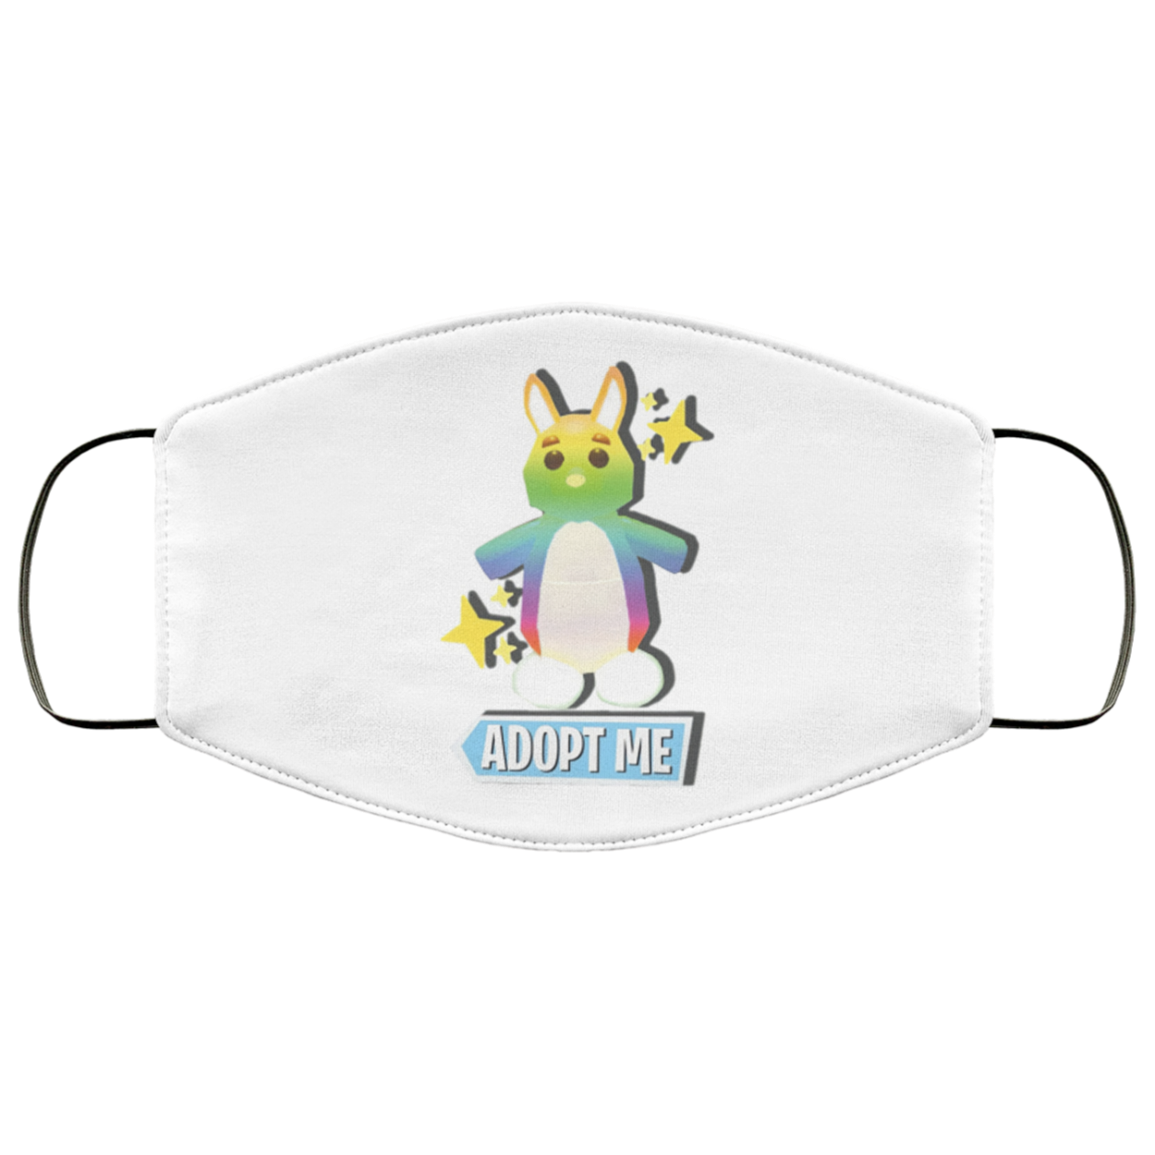 Neon Pet Adopt Me Roblox Roblox Game Adopt Me Characters Face Mask Q Finder Trending Design T Shirt - roblox mask 2020